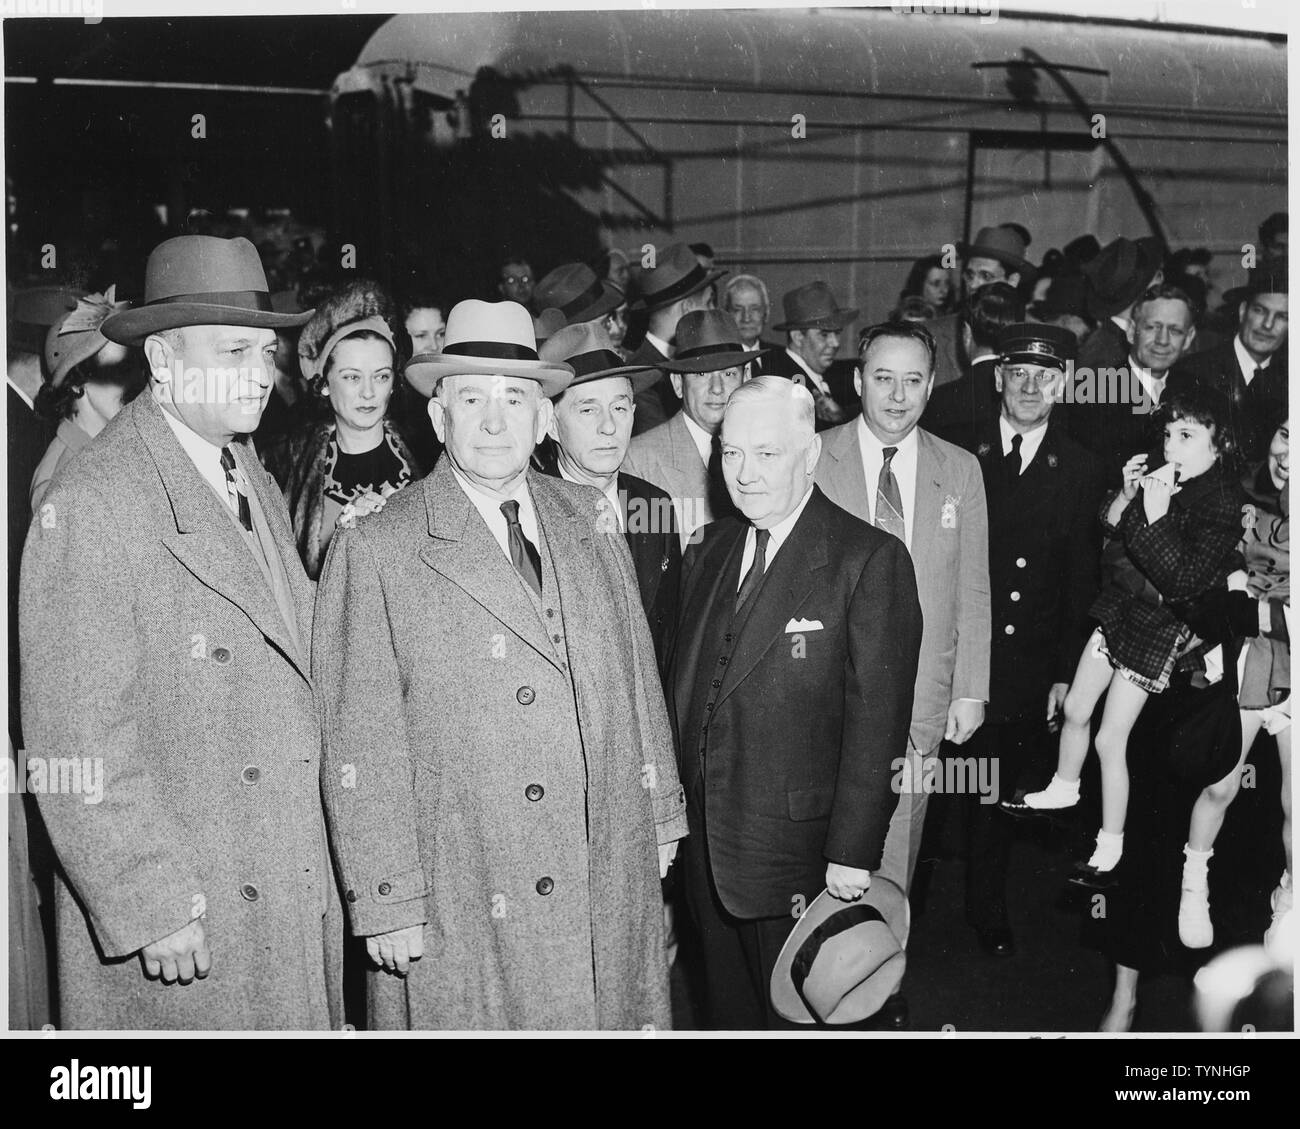 Vice President-elect Alben W. Barkley standing with several unidentified people. Barkley had just returned to Washington, DC after his victory in the 1948 election. Stock Photo